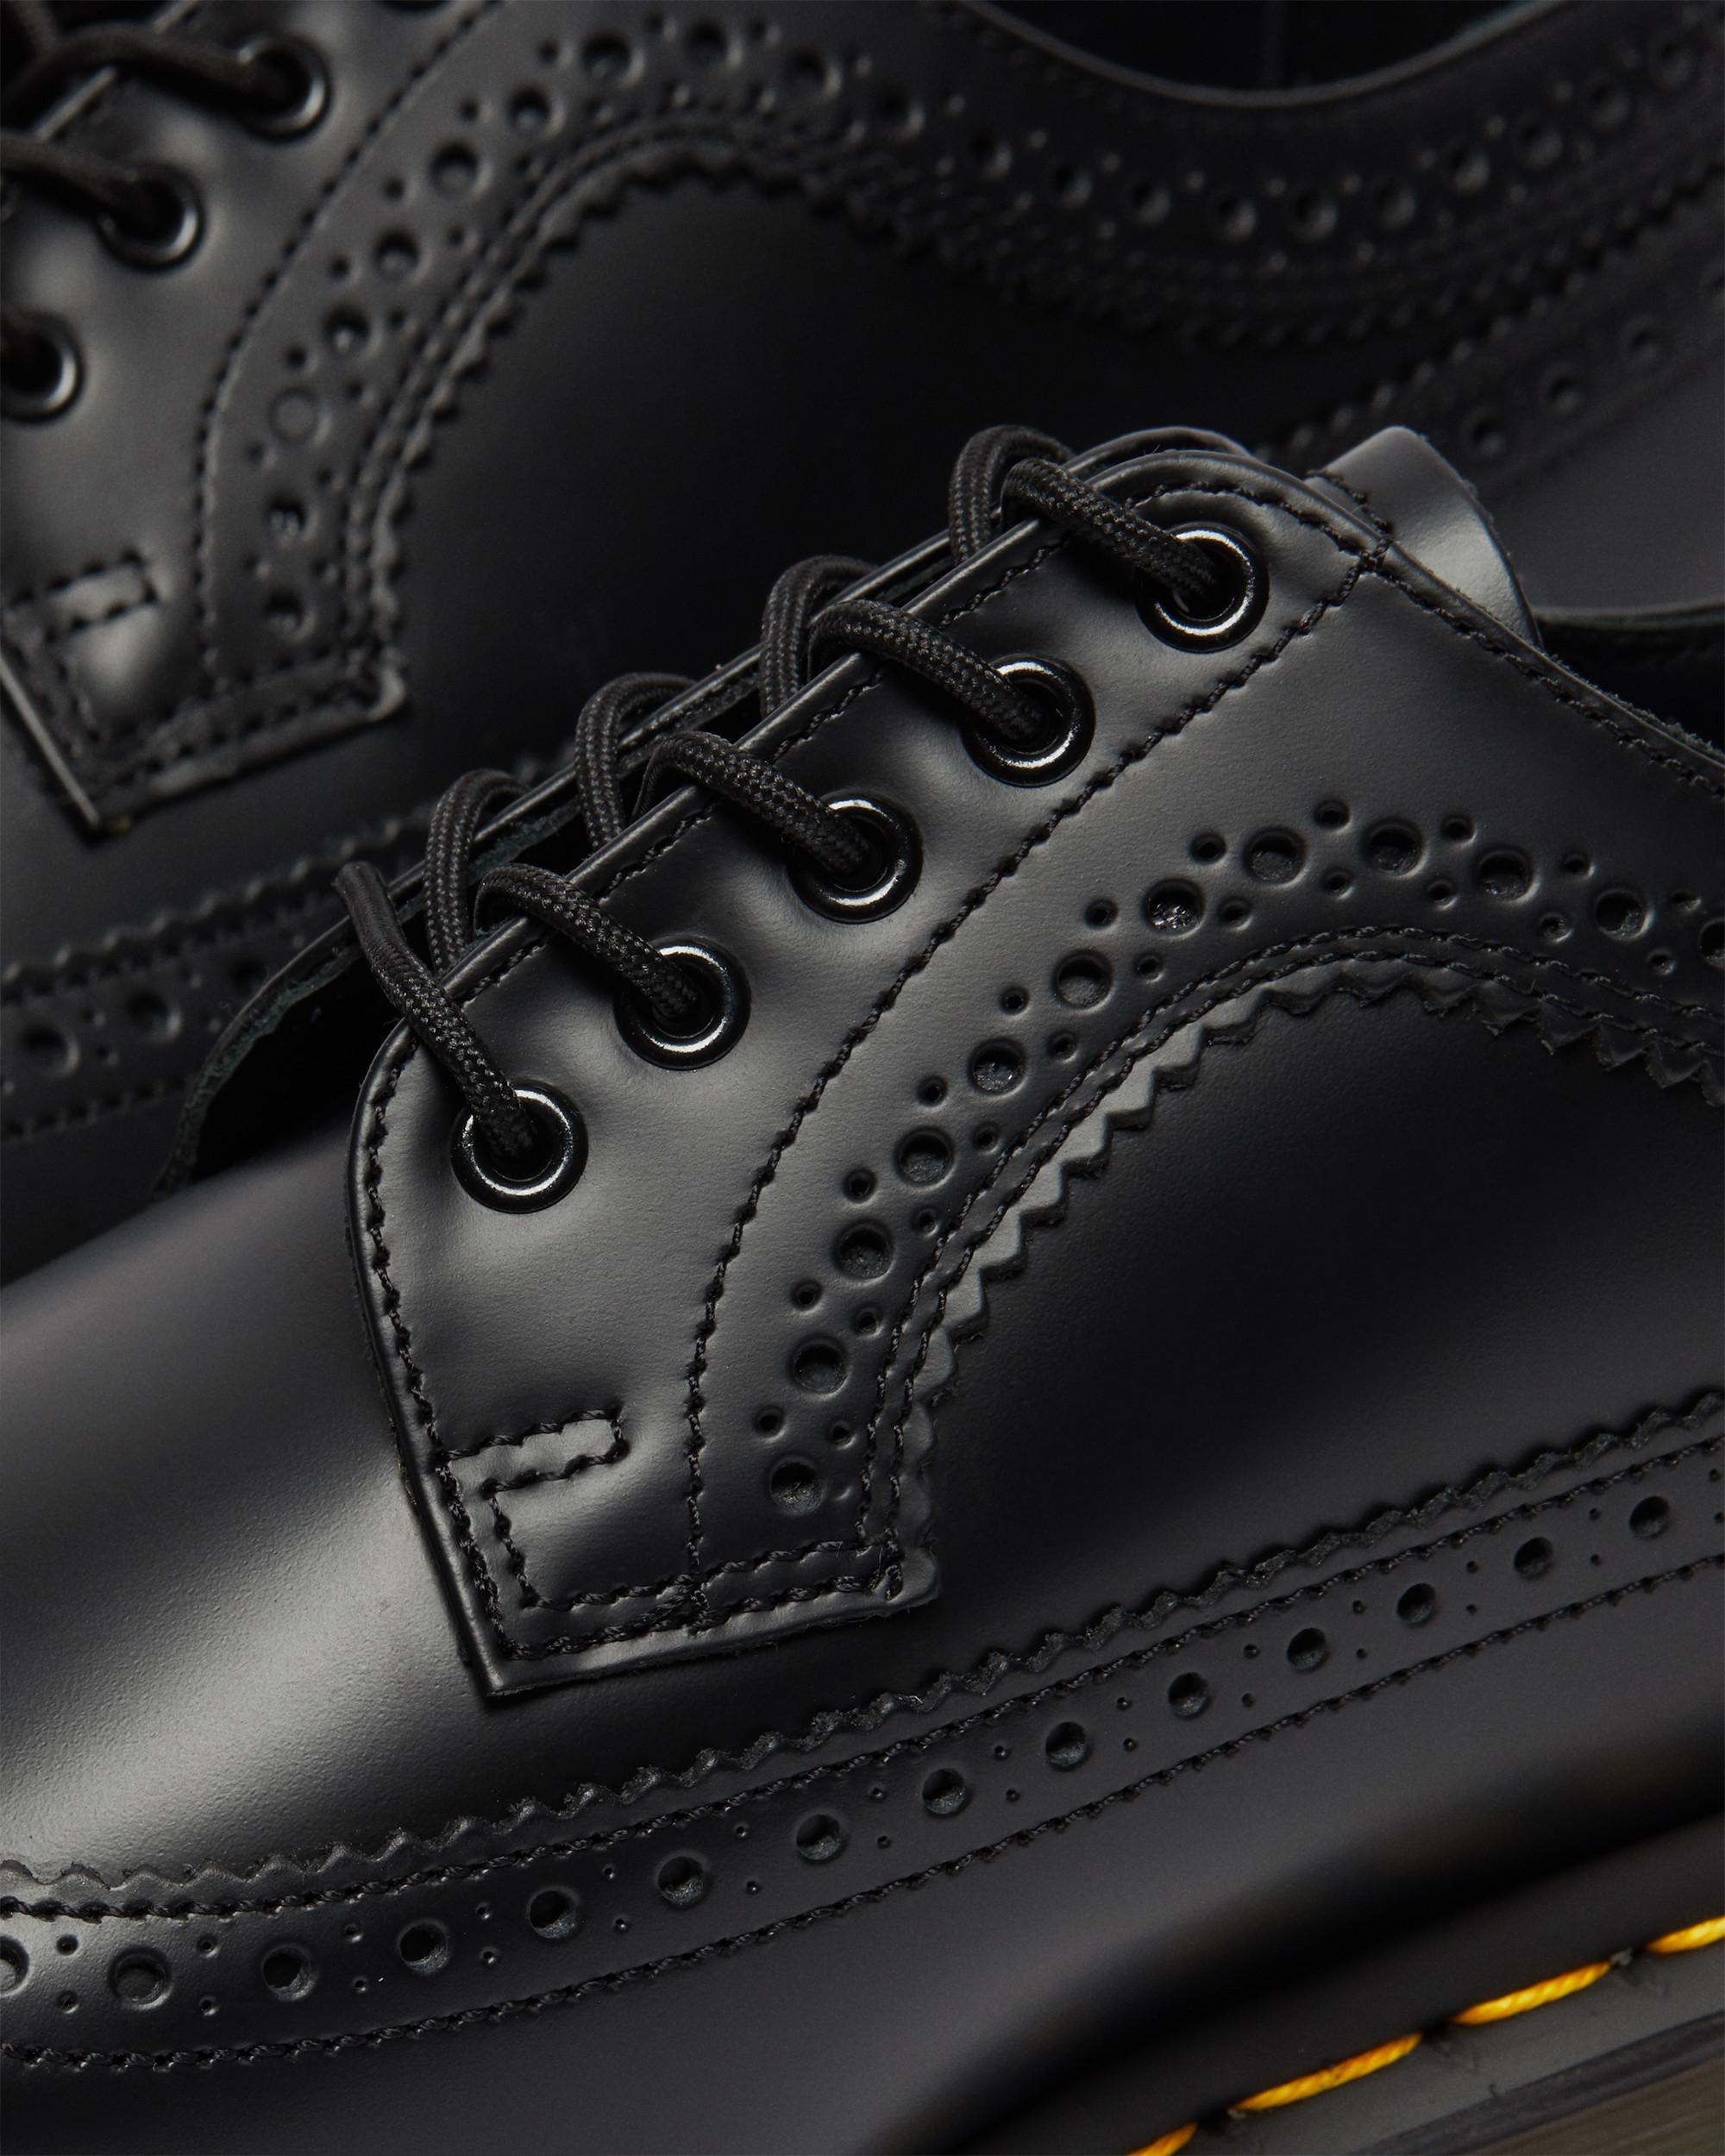 3989 Smooth Leather Brogue Shoes3989 Smooth Leather Brogue -kengät Dr. Martens